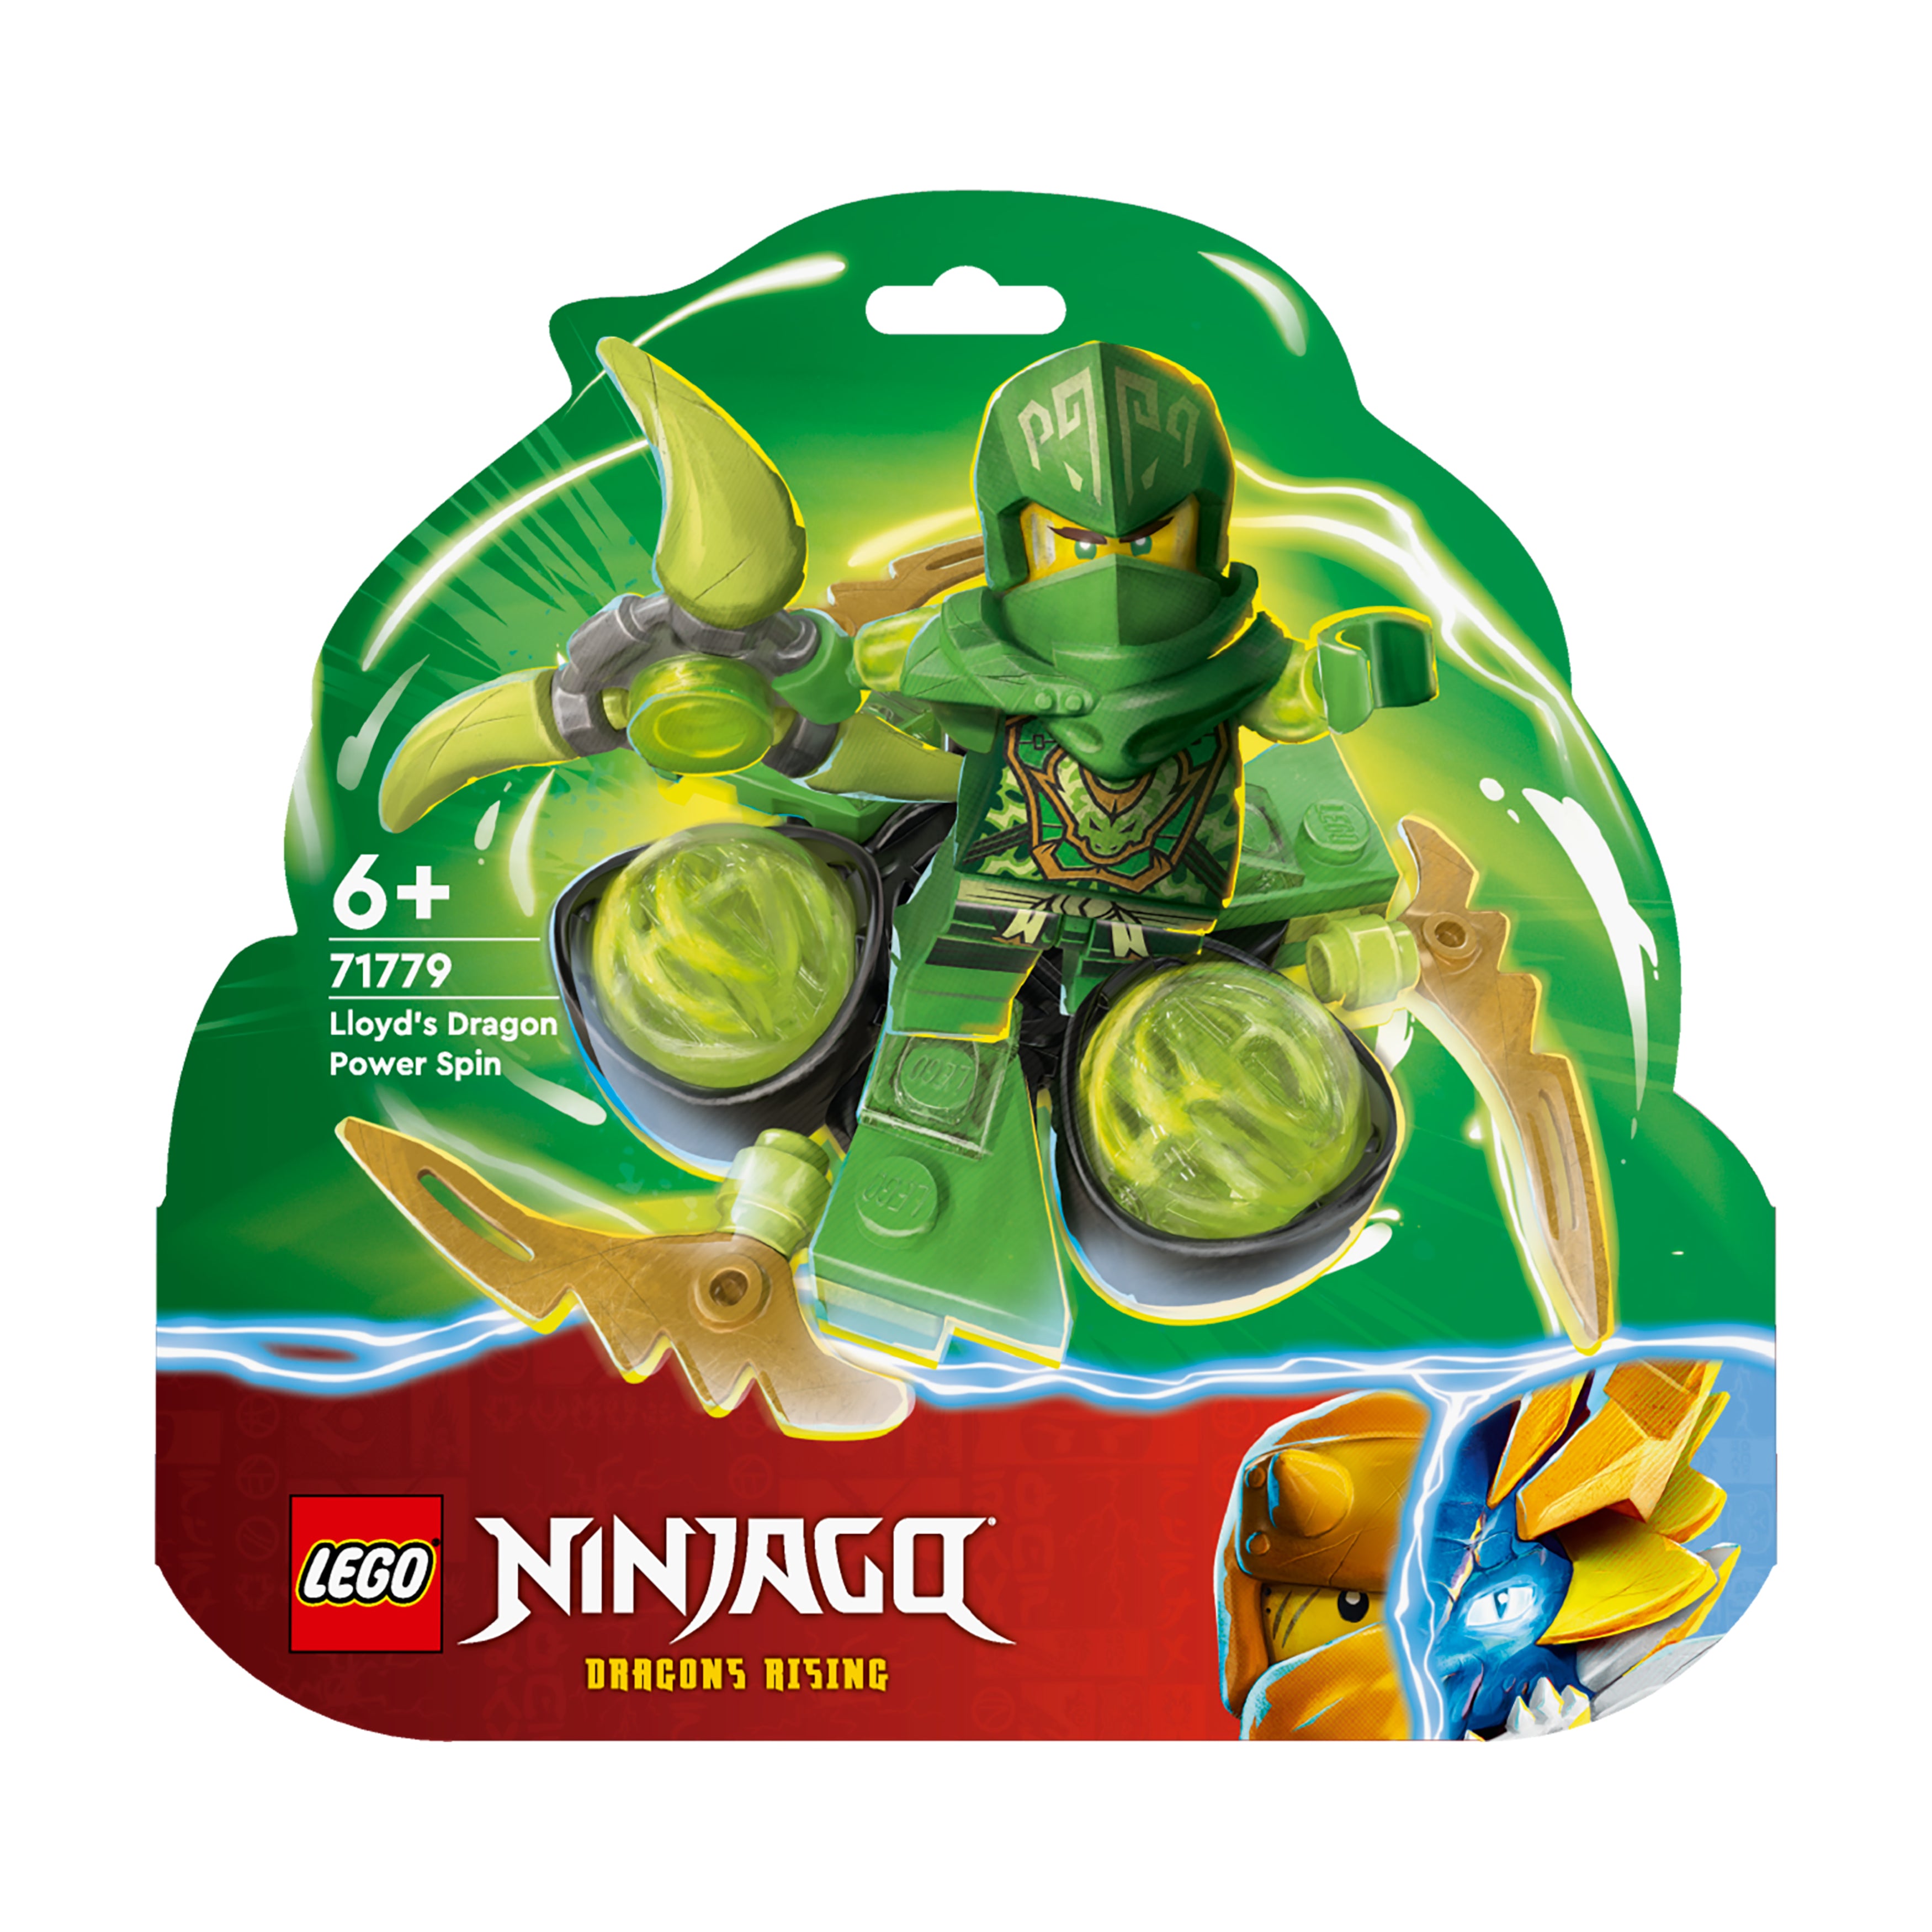 LEGO 71779 NINJAGO Lloyd's Dragon Power Spinjitzu Spin Set, Ninja Spinning Toy, Small Gift for Kids aged 6 Plus Years Old, with Collectible Lloyd Minifigure